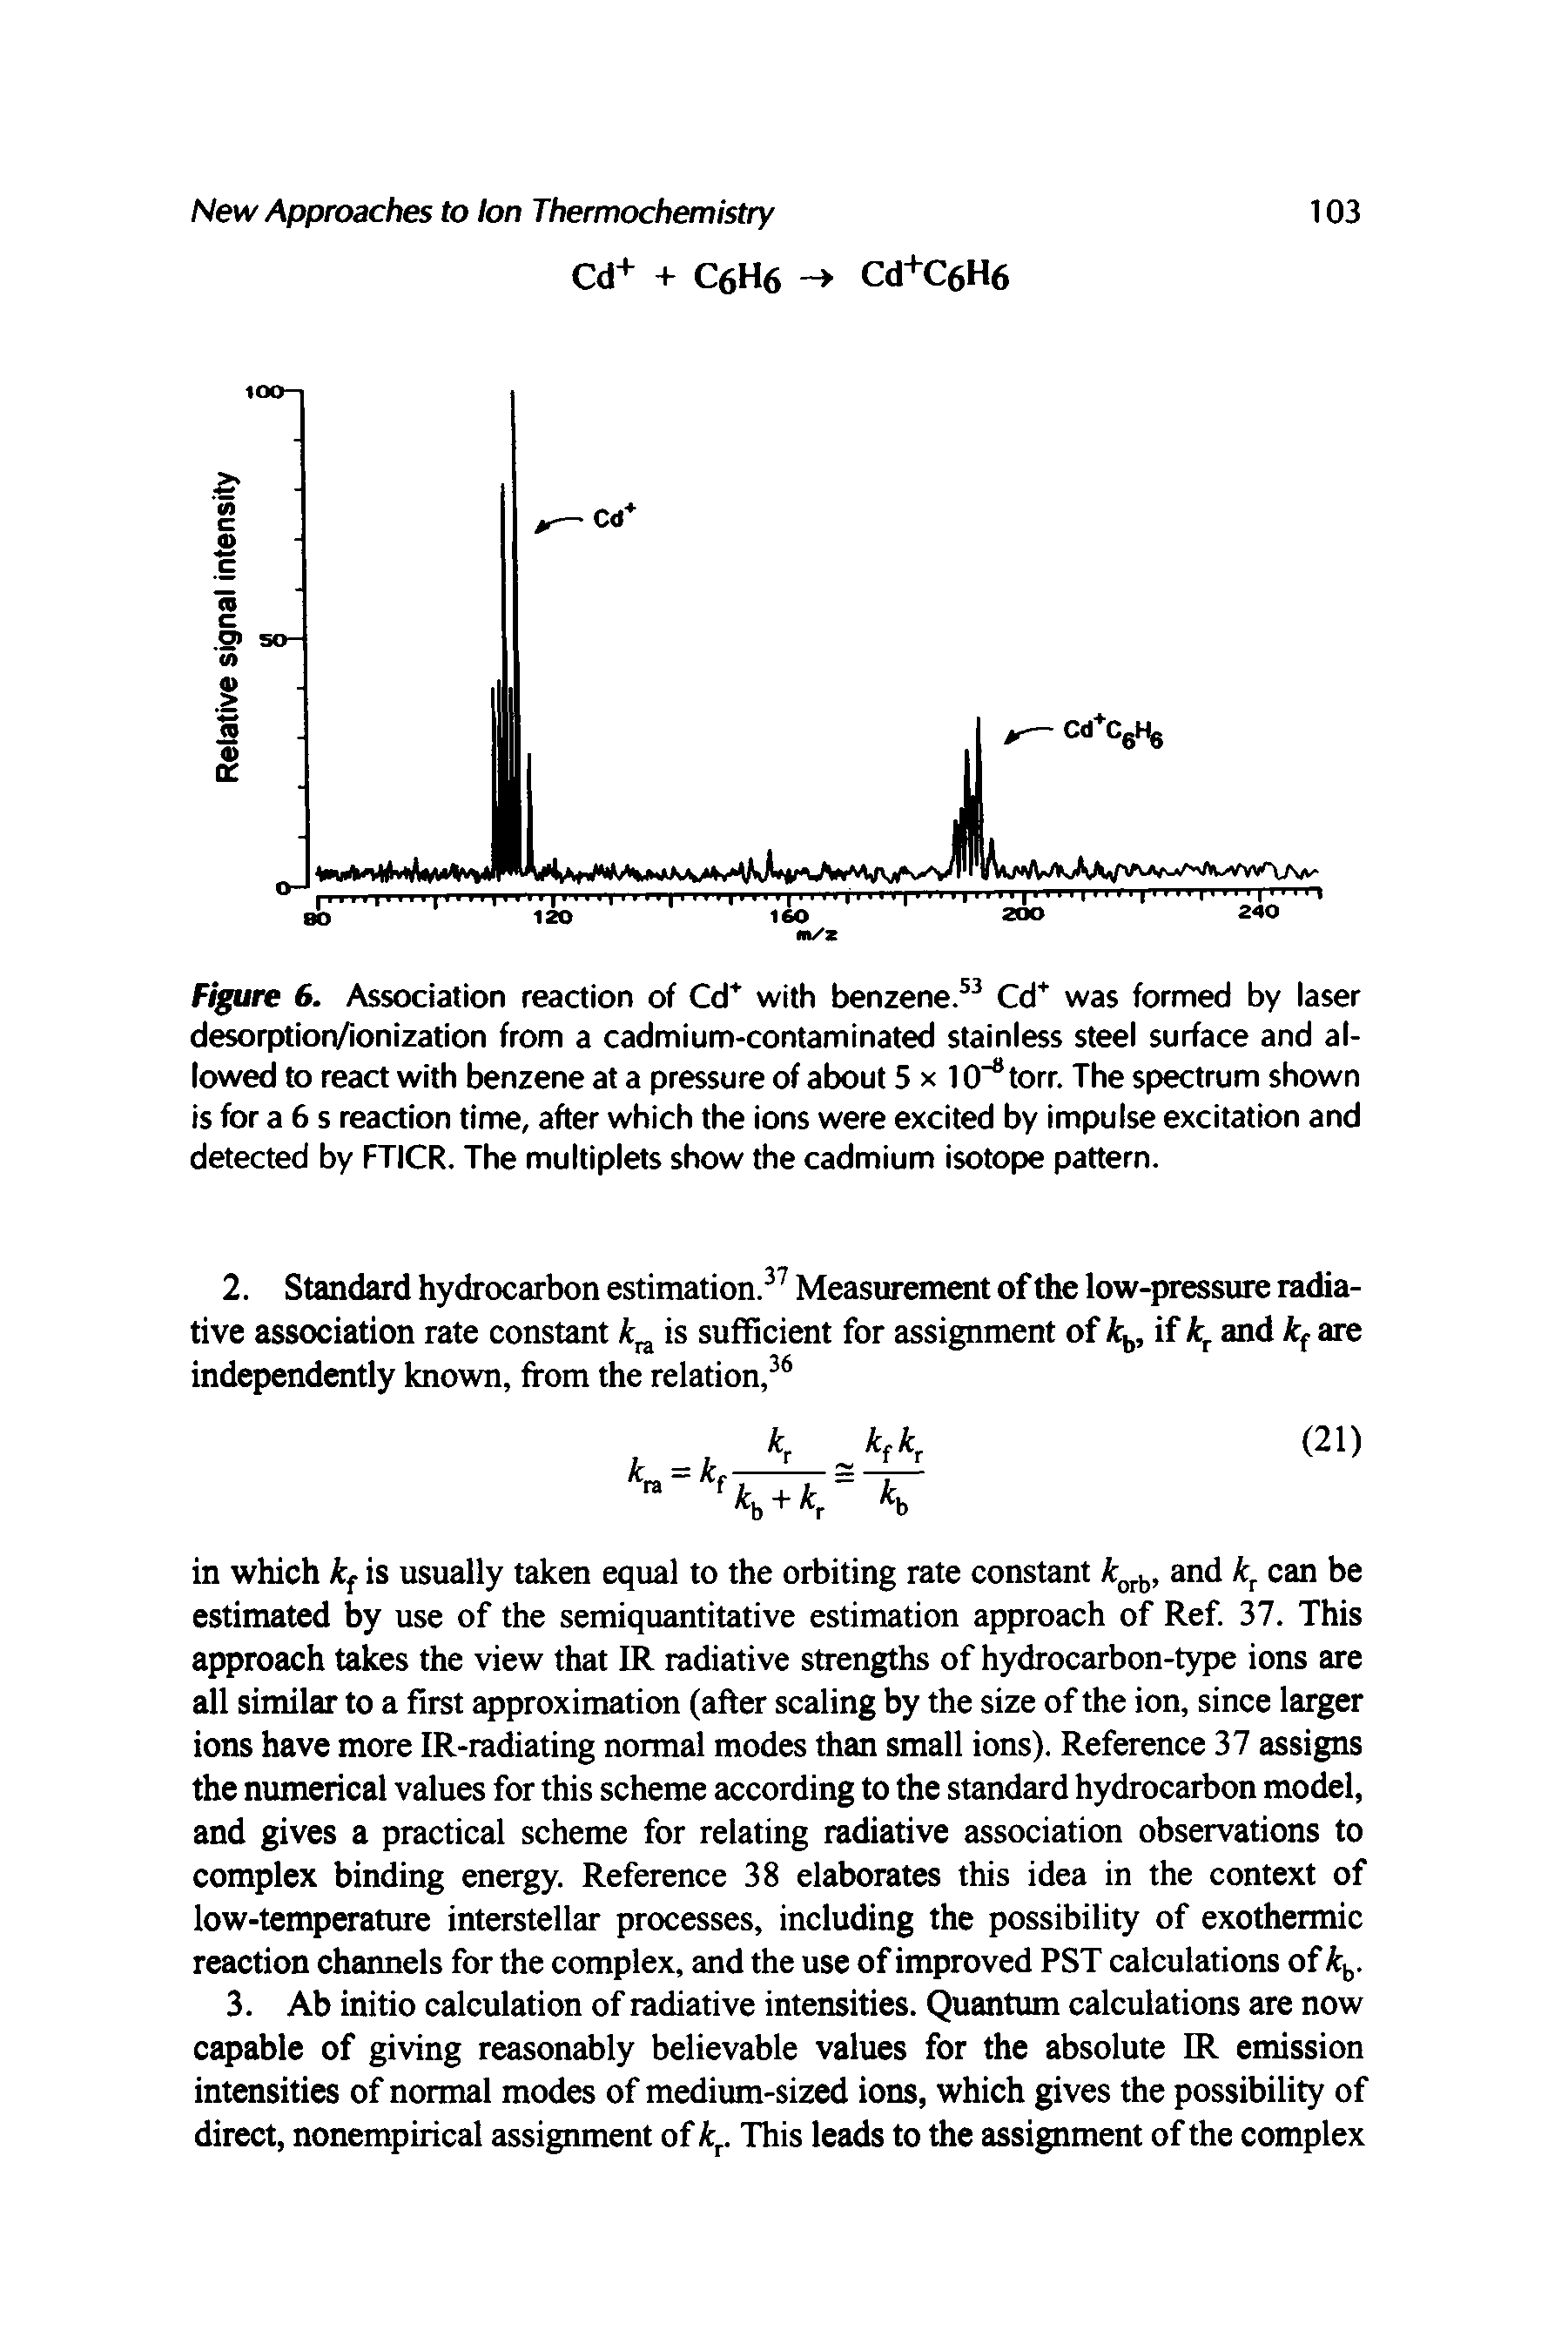 Figure 6. Association reaction of Cd with benzene. Cd was formed by laser desorption/ionization from a cadmium-contaminated stainless steel surface and allowed to react with benzene at a pressure of about 5 x 10" torr. The spectrum shown is for a 6 s reaction time, after which the ions were excited by impulse excitation and detected by FTICR. The multiplets show the cadmium isotope pattern.